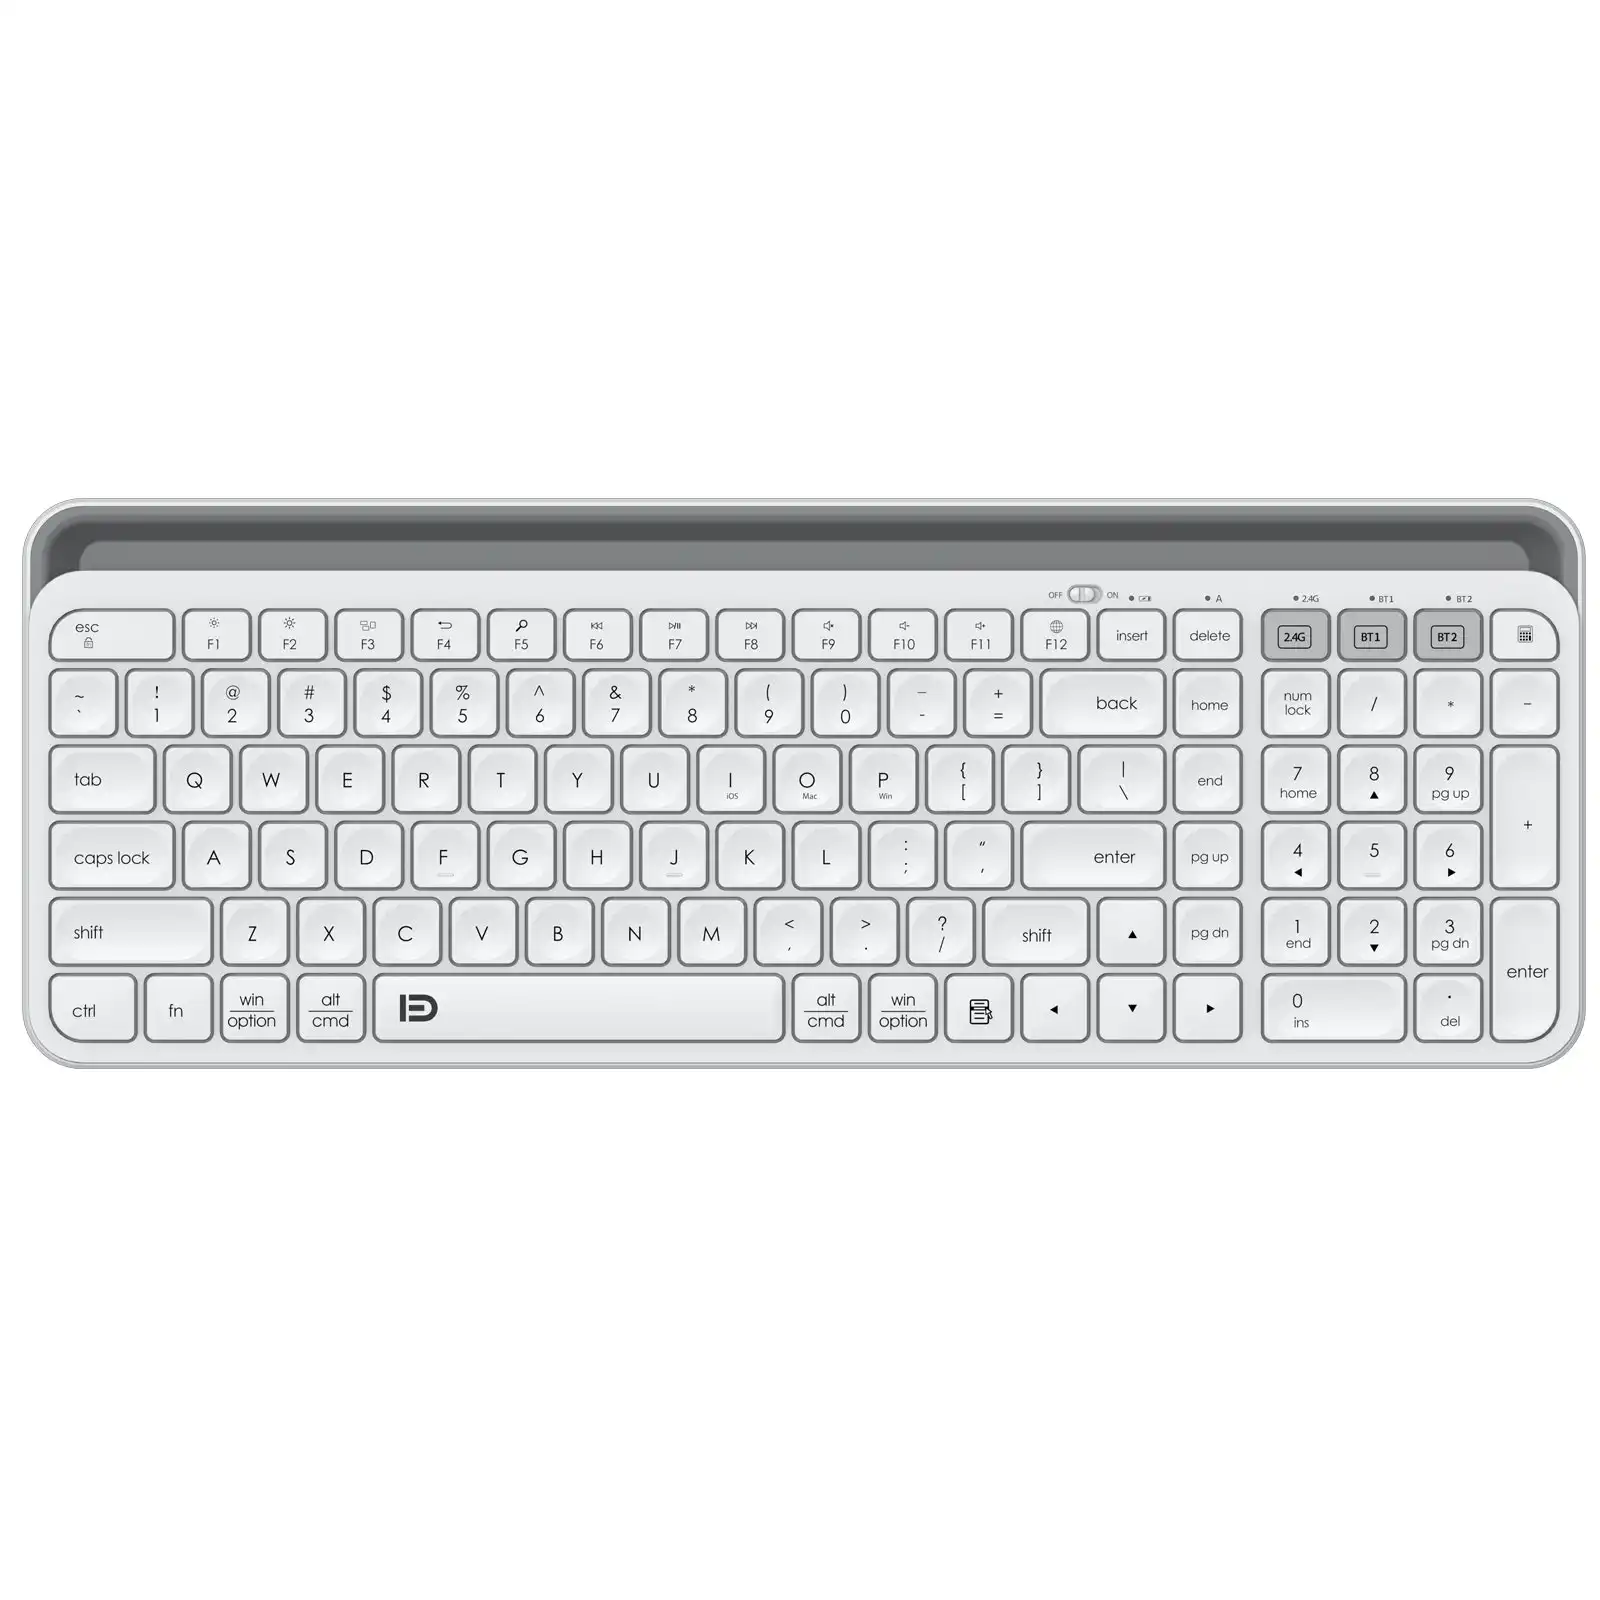 TODO Bluetooth Wireless Keyboard Tablet Holder Mac Windows Android 2.4G USB BT 3.0 5.0 - White